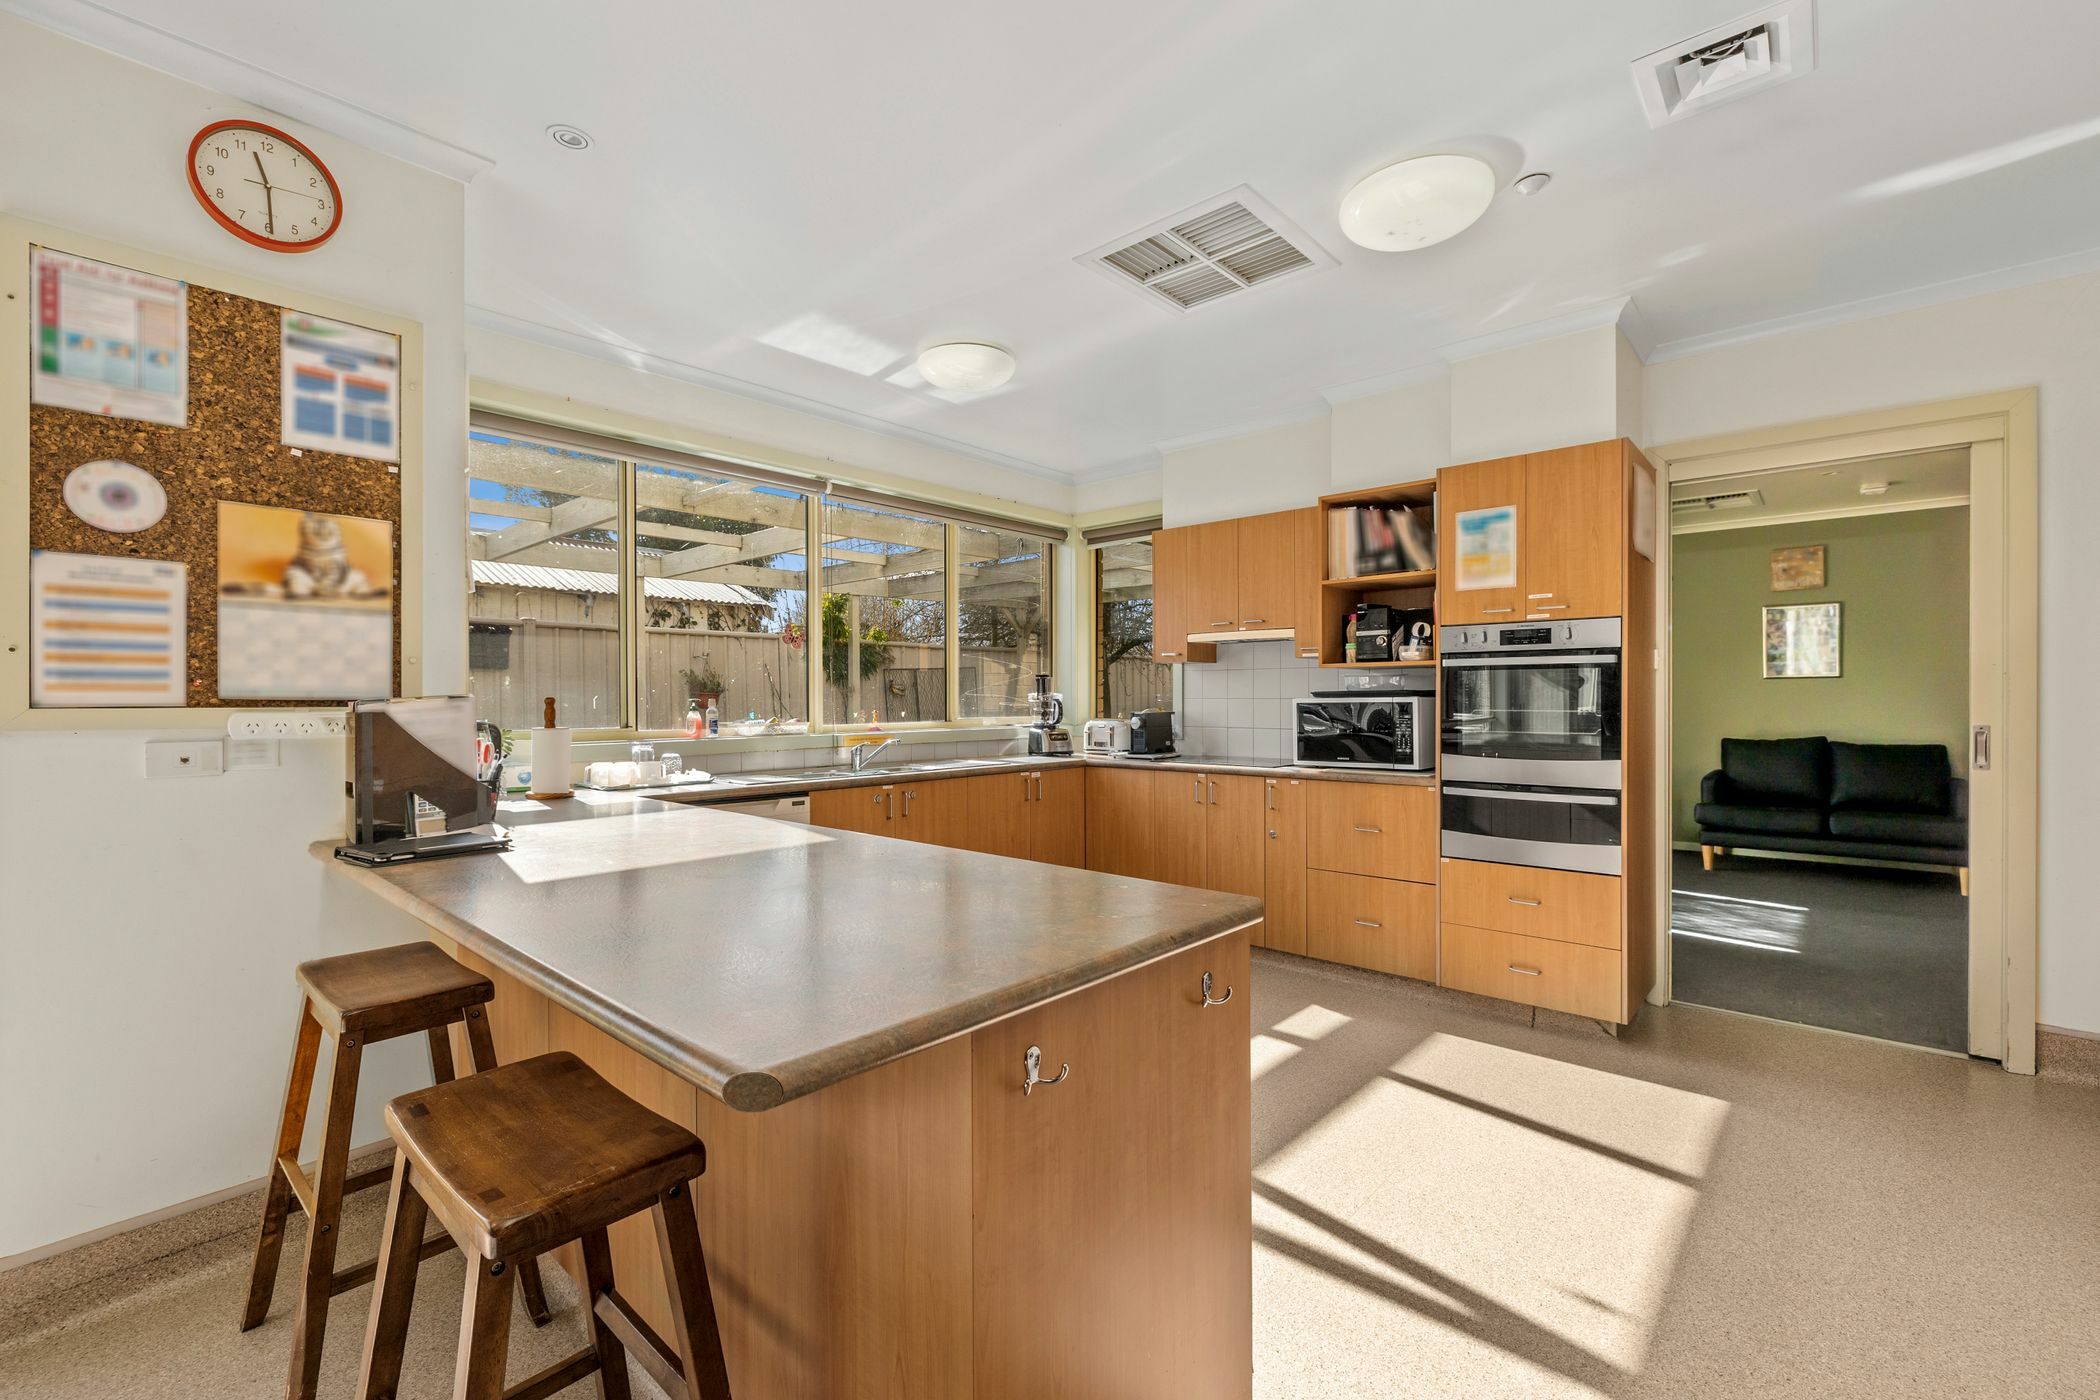 Kitchen area with wooden cabinets and large windows